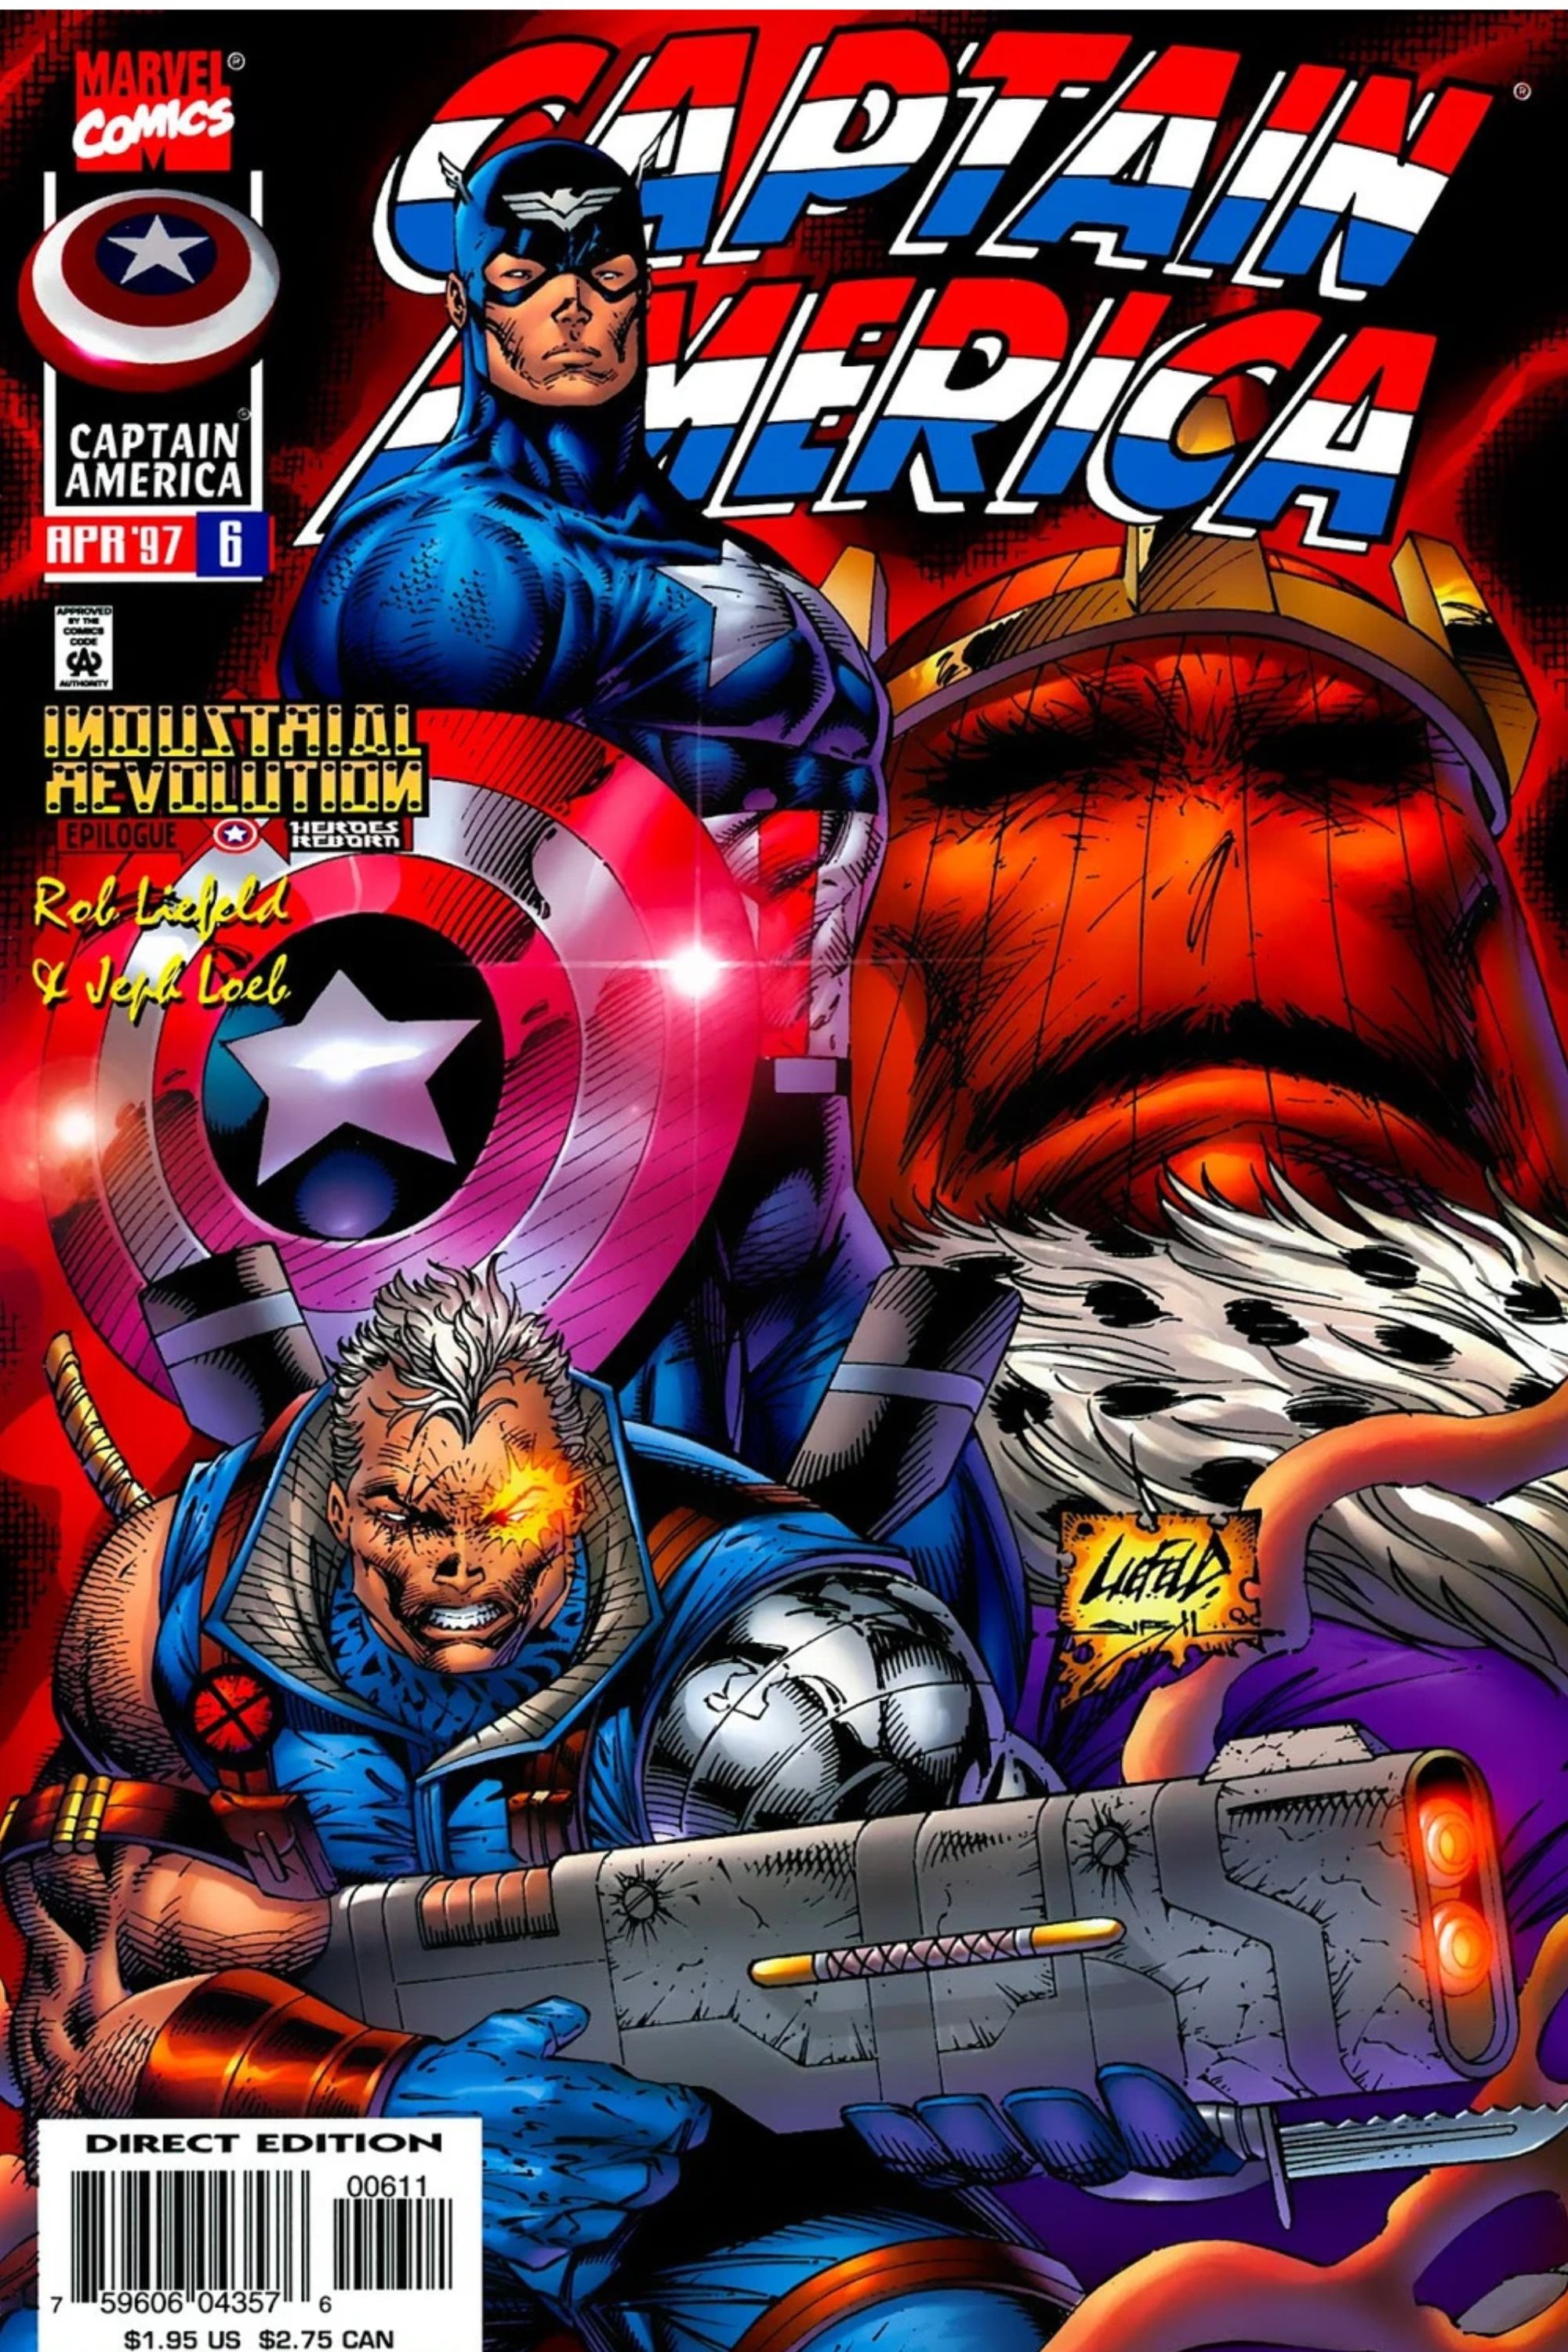 Captain America looking very muscular and beefed up in a Rob liefeld Captain America cover.